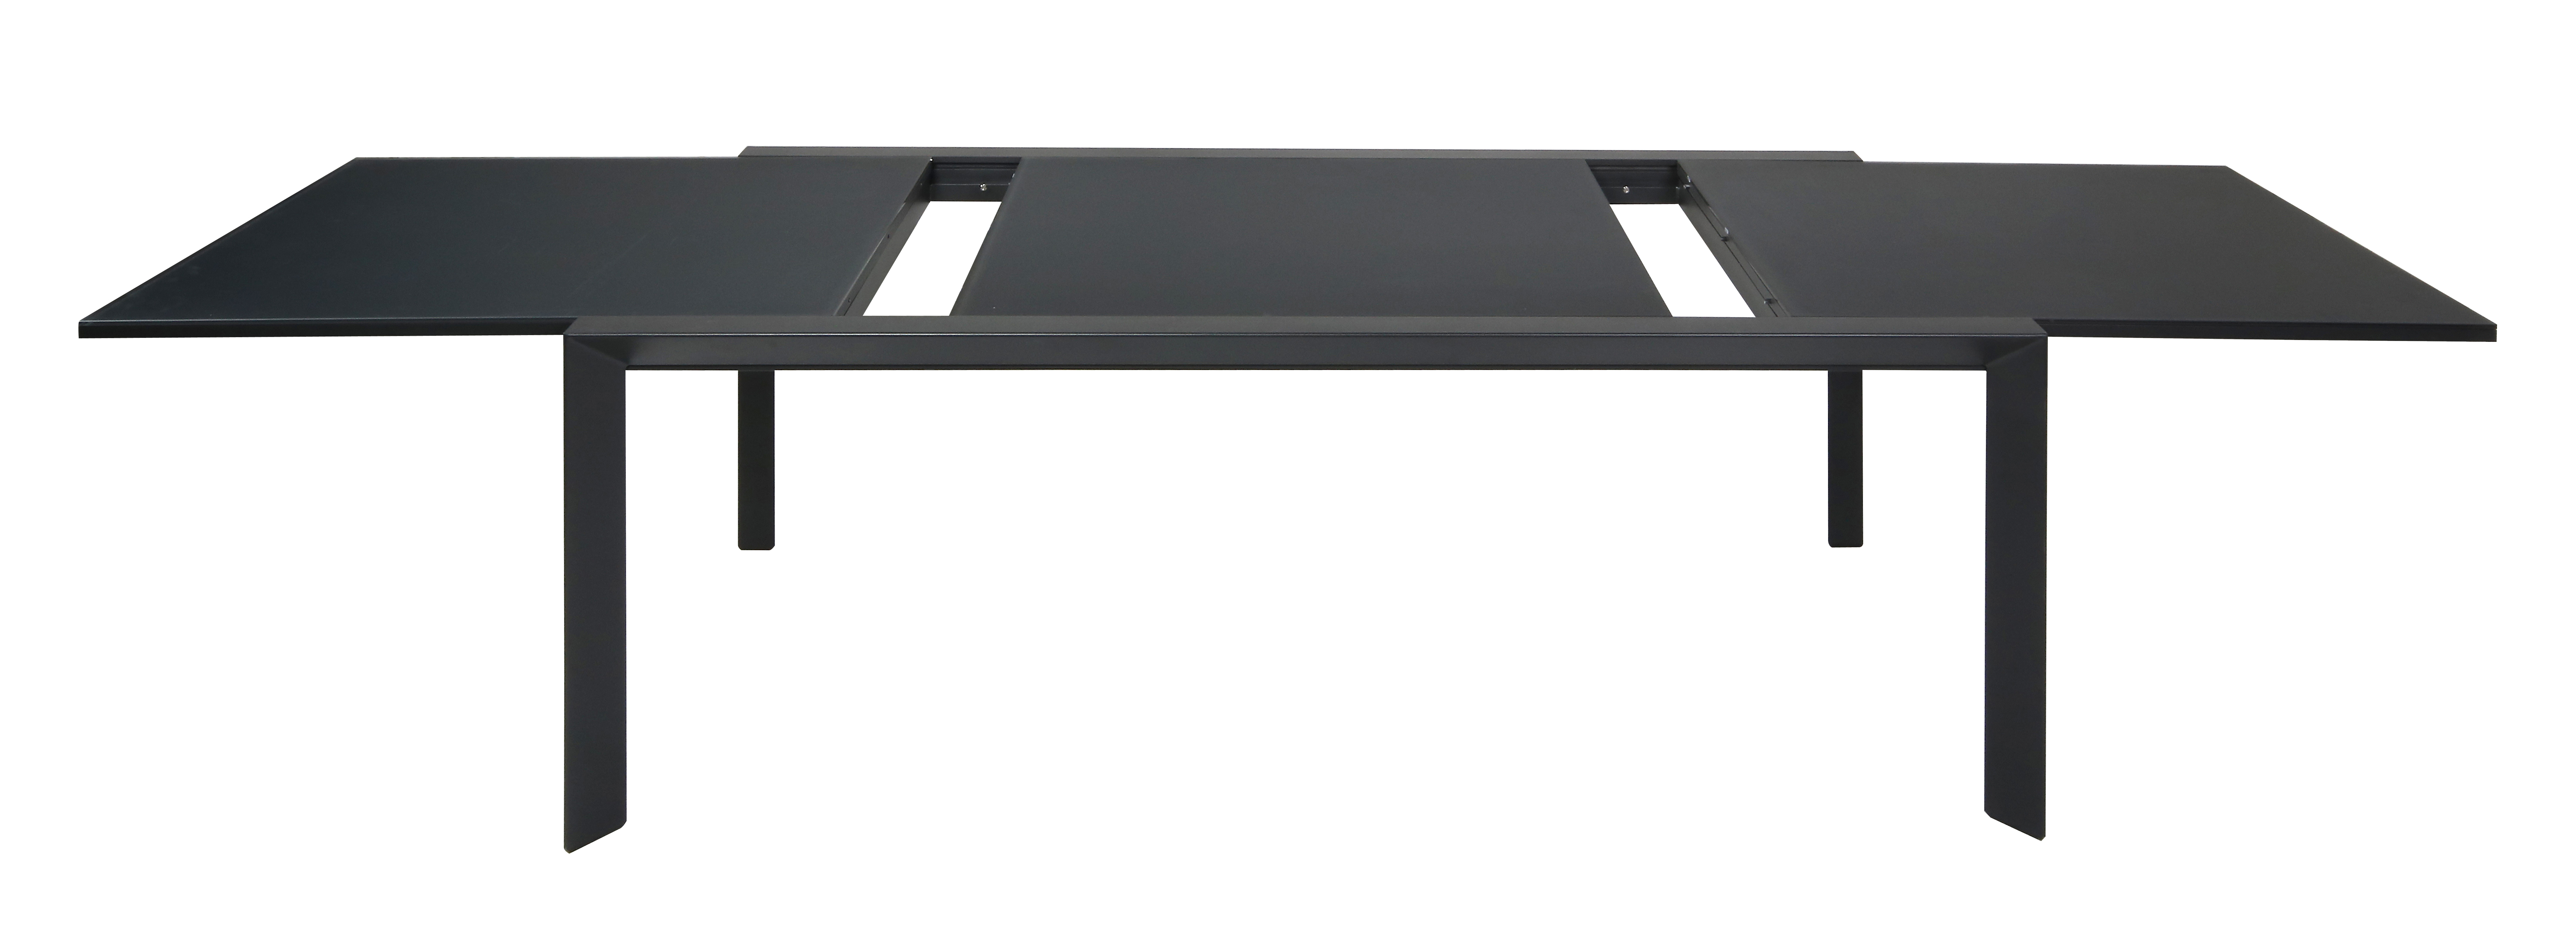 The Grazia Extendable Dining table